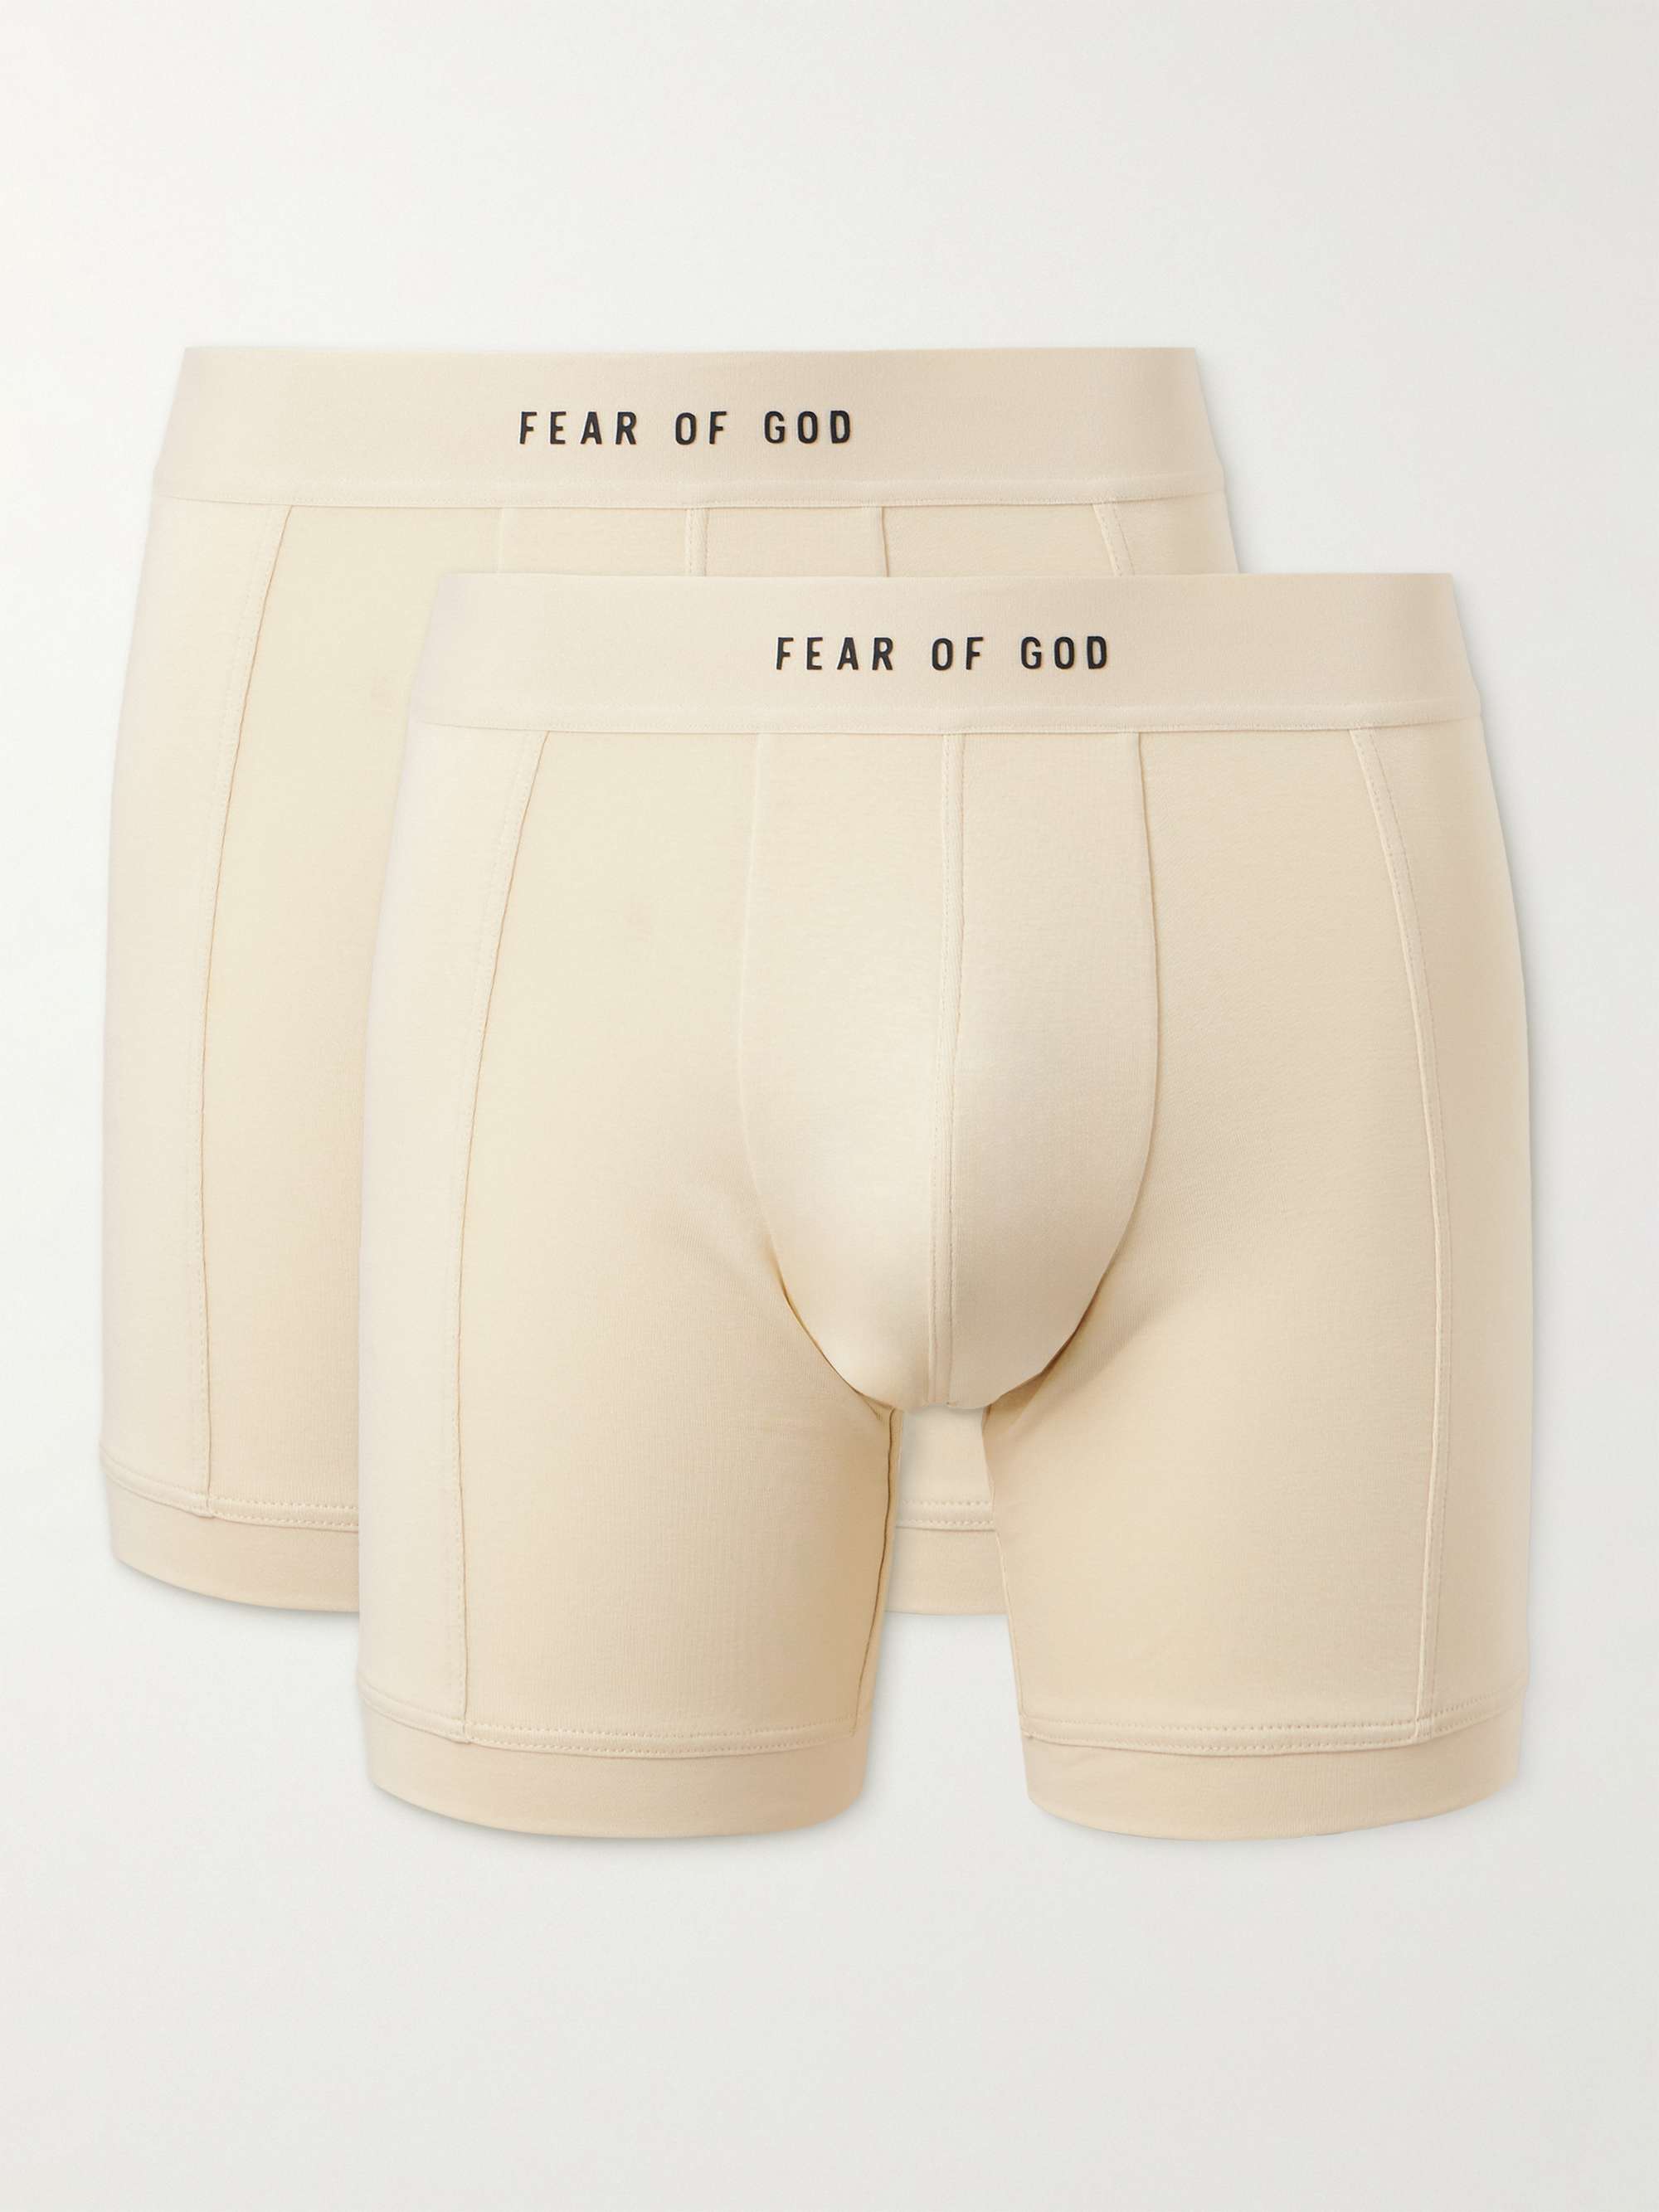 FEAR OF GOD　Essentials　２枚セット　Ｍ